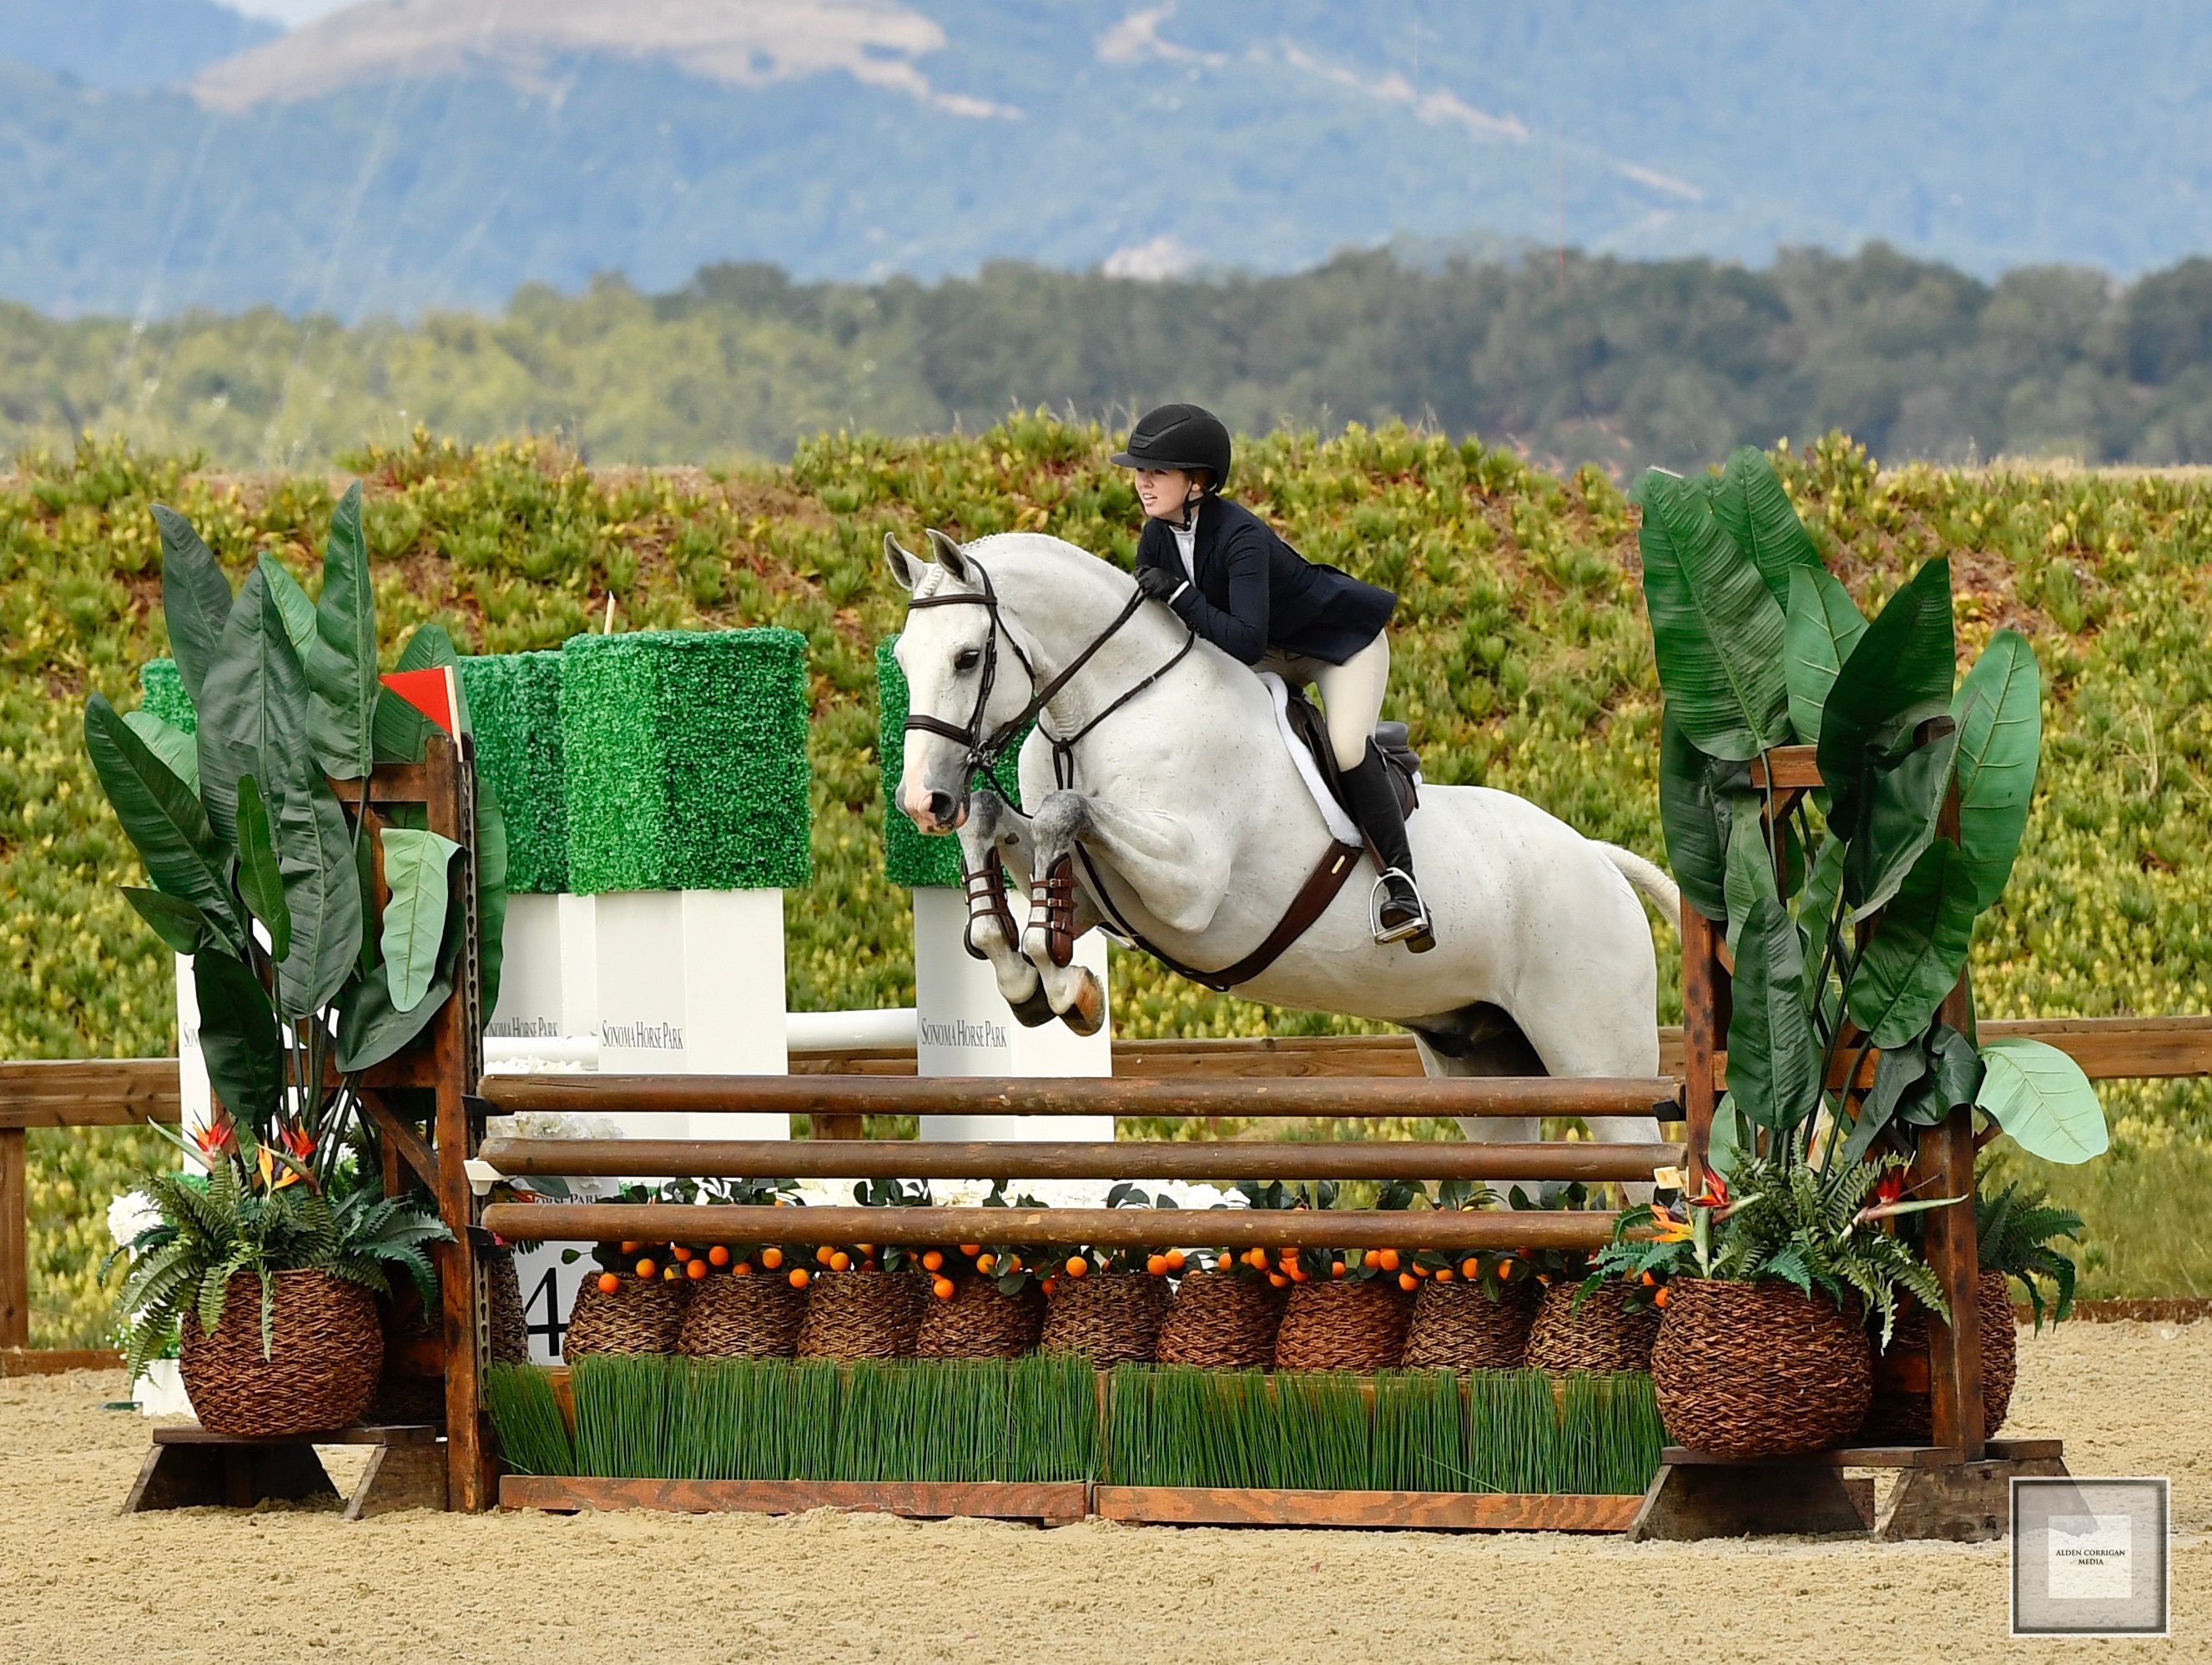 Student Skyler Allen and Winterfell at Sonoma Horse Park. Photography by Alden Corrigan Media​​​​​​​